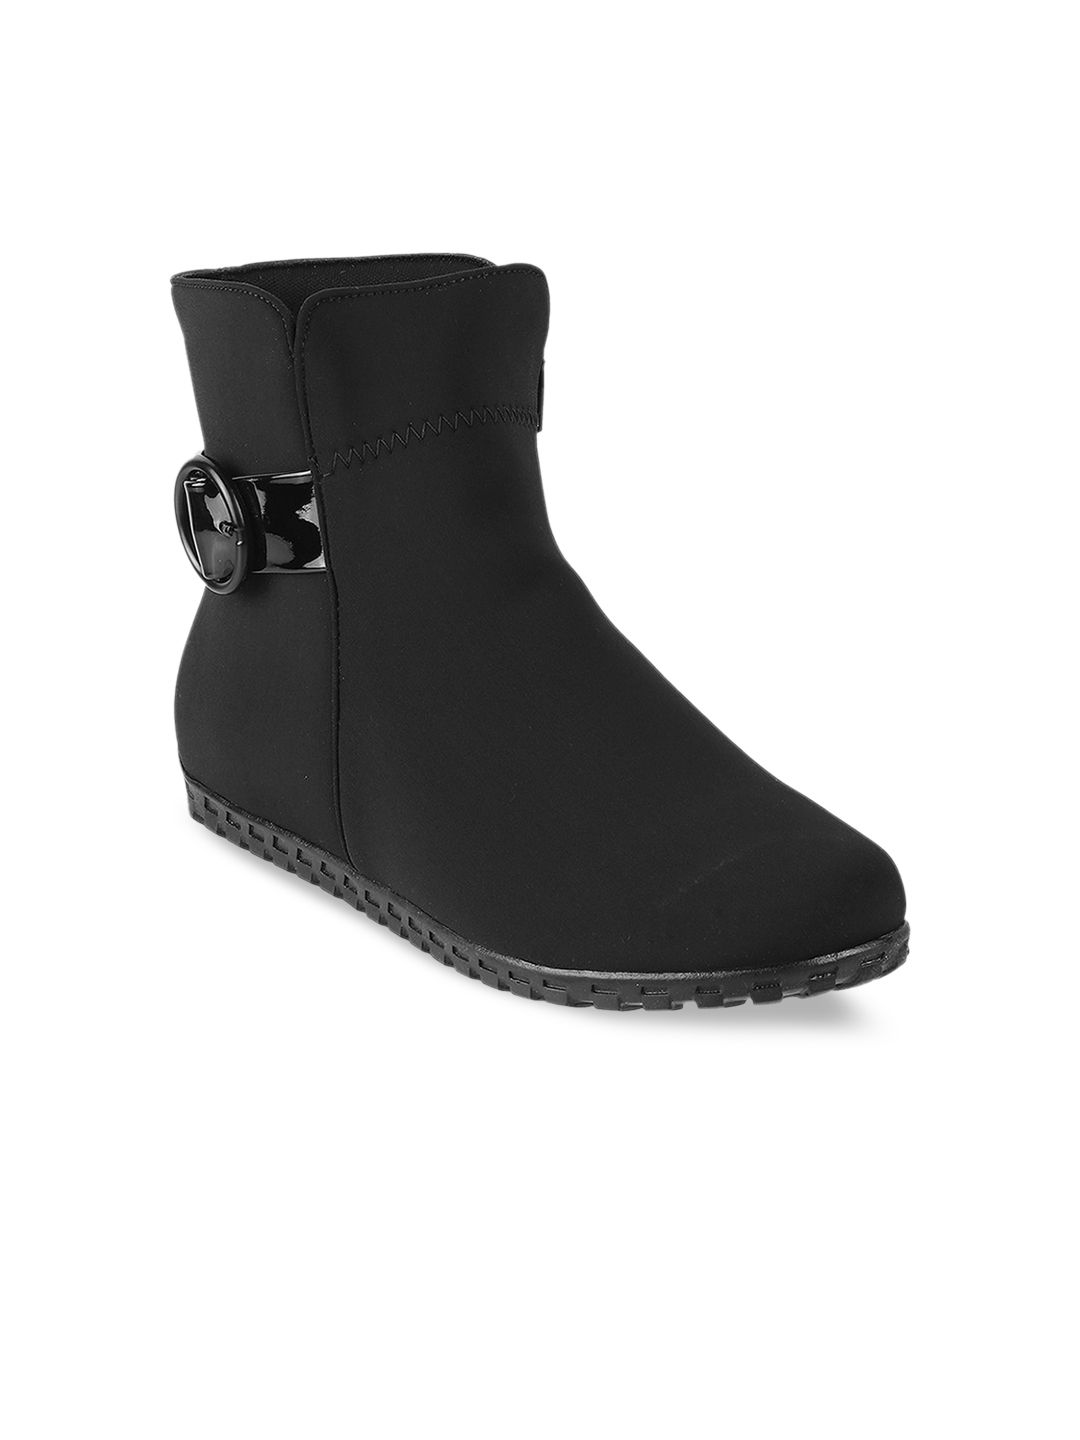 Mochi Women Black Solid Boots with Buckle Detail Price in India